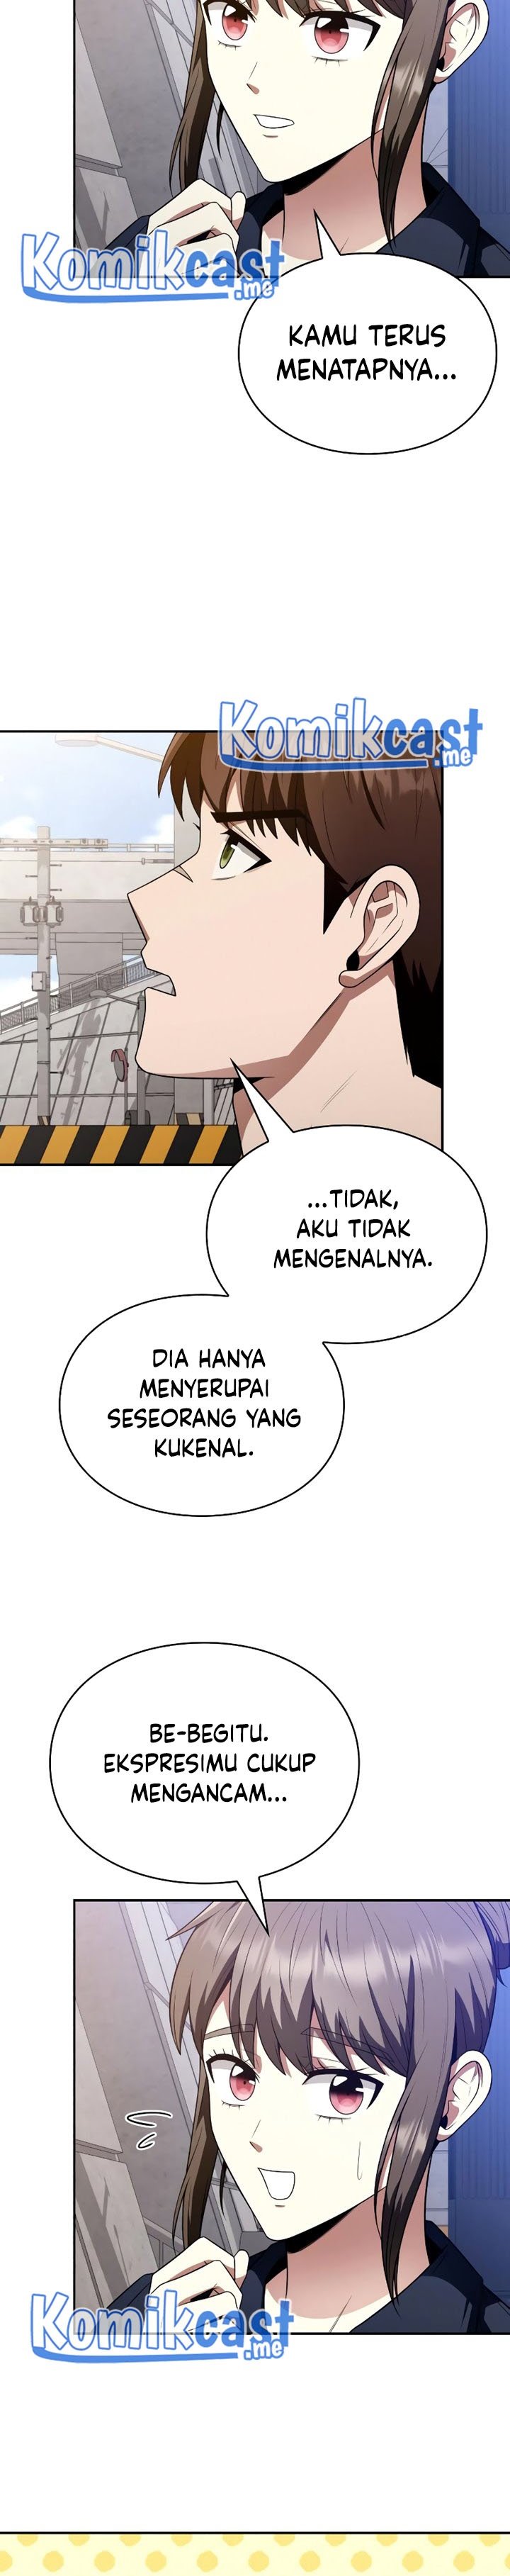 Dilarang COPAS - situs resmi www.mangacanblog.com - Komik clever cleaning life of the returned genius hunter 005 - chapter 5 6 Indonesia clever cleaning life of the returned genius hunter 005 - chapter 5 Terbaru 26|Baca Manga Komik Indonesia|Mangacan